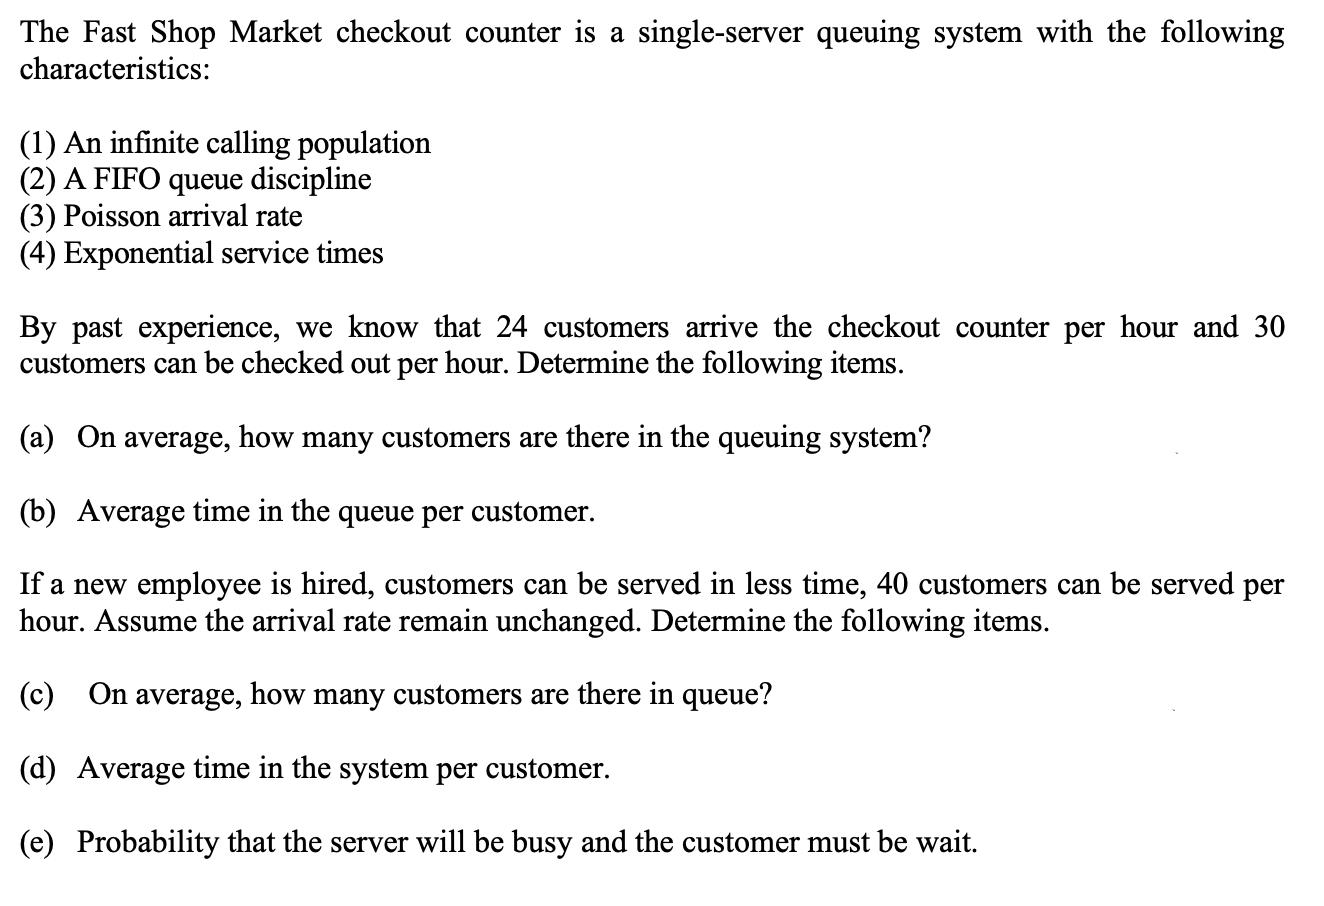 The Fast Shop Market checkout counter is a single-server queuing system with the following characteristics: